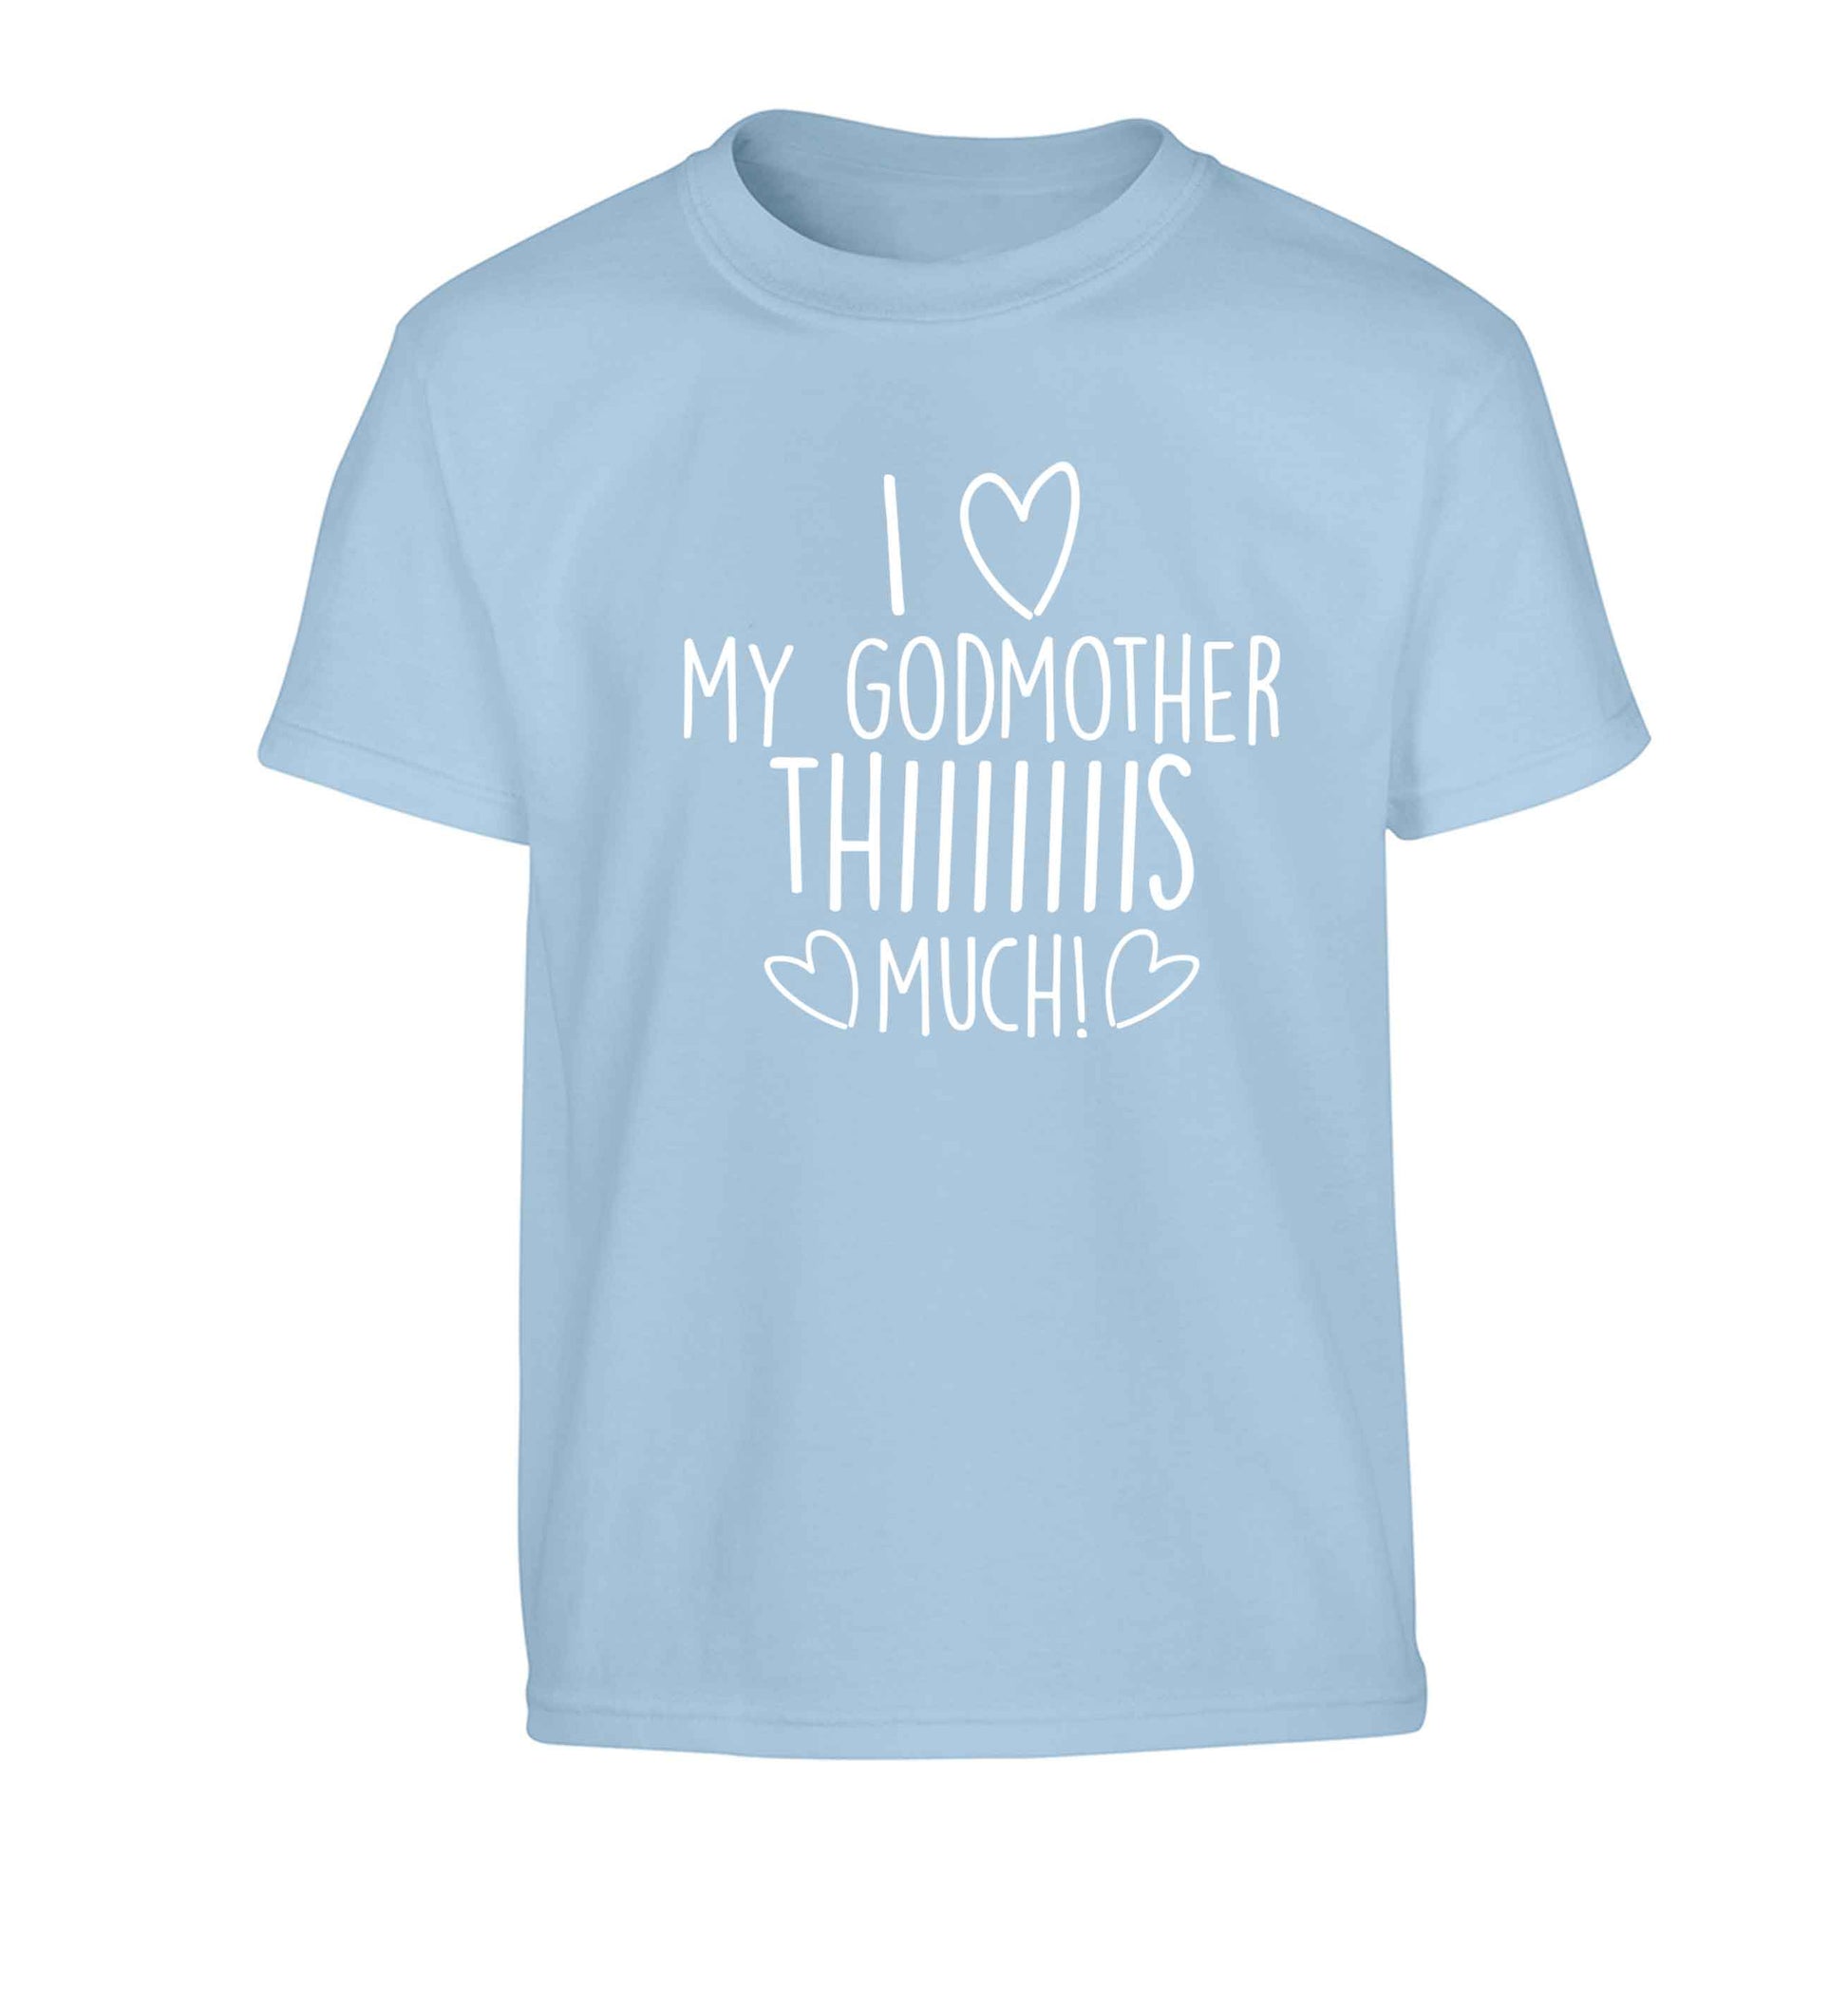 I love my Godmother this much Children's light blue Tshirt 12-13 Years